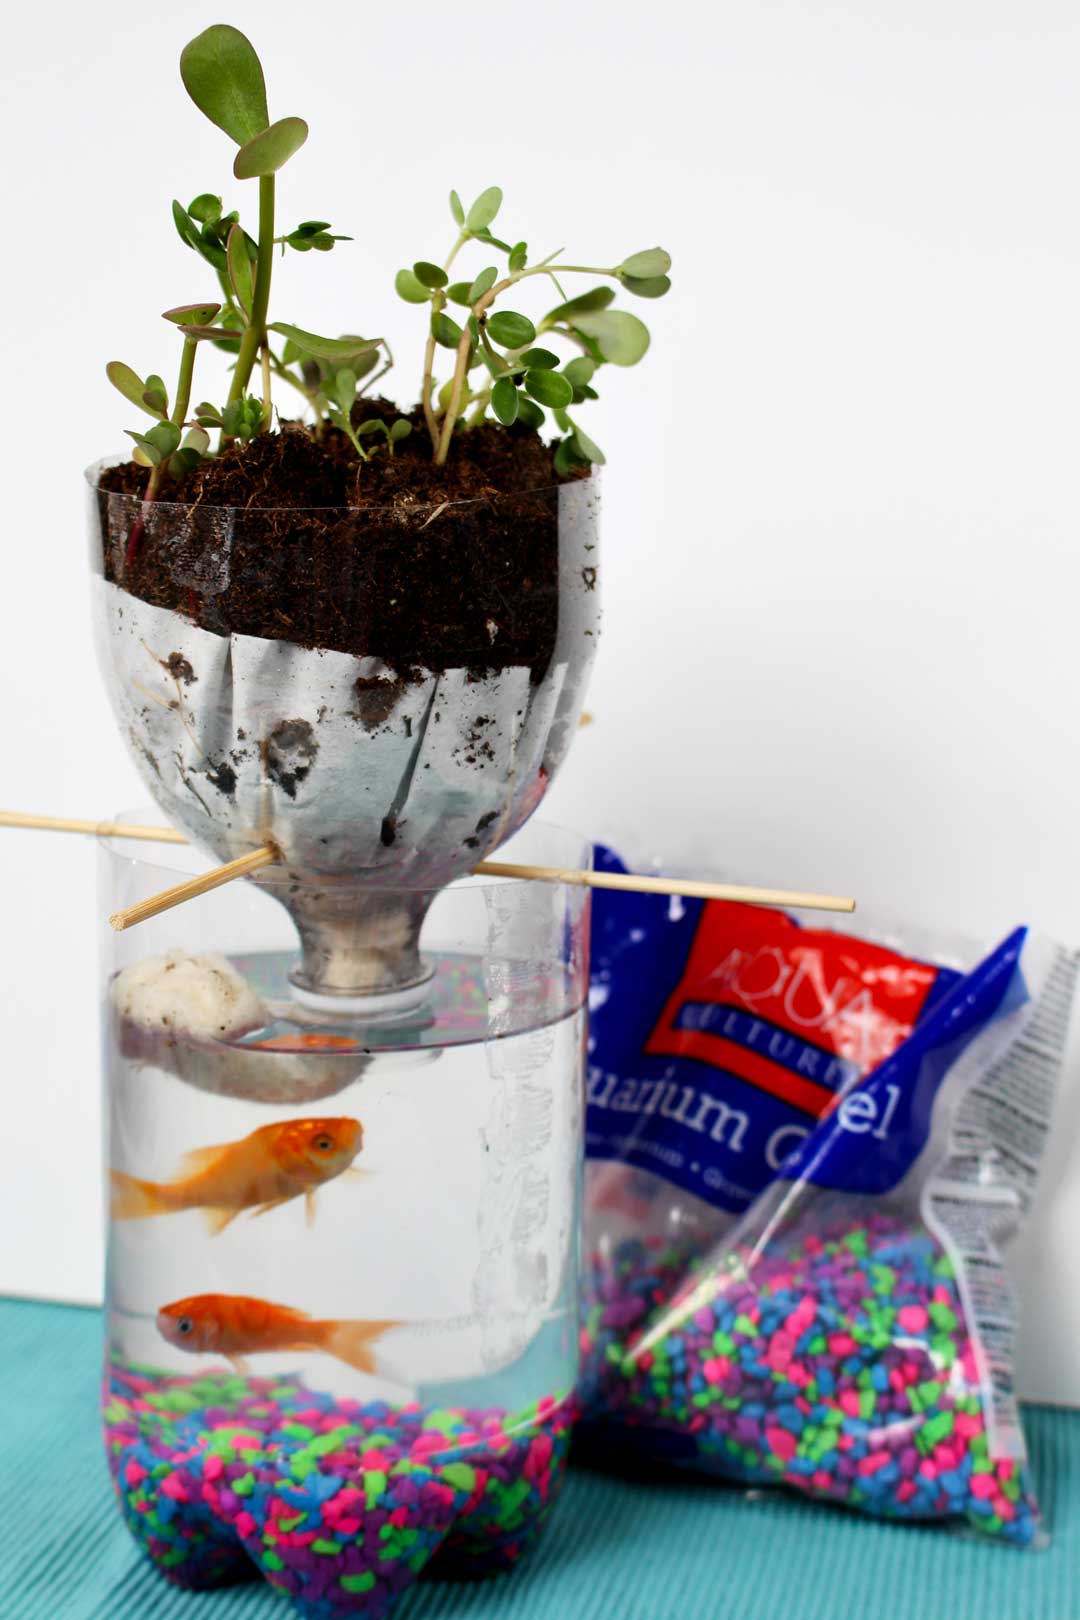 DIY 2-liter Bottle Ecosystem Project - Welcome To Nana's